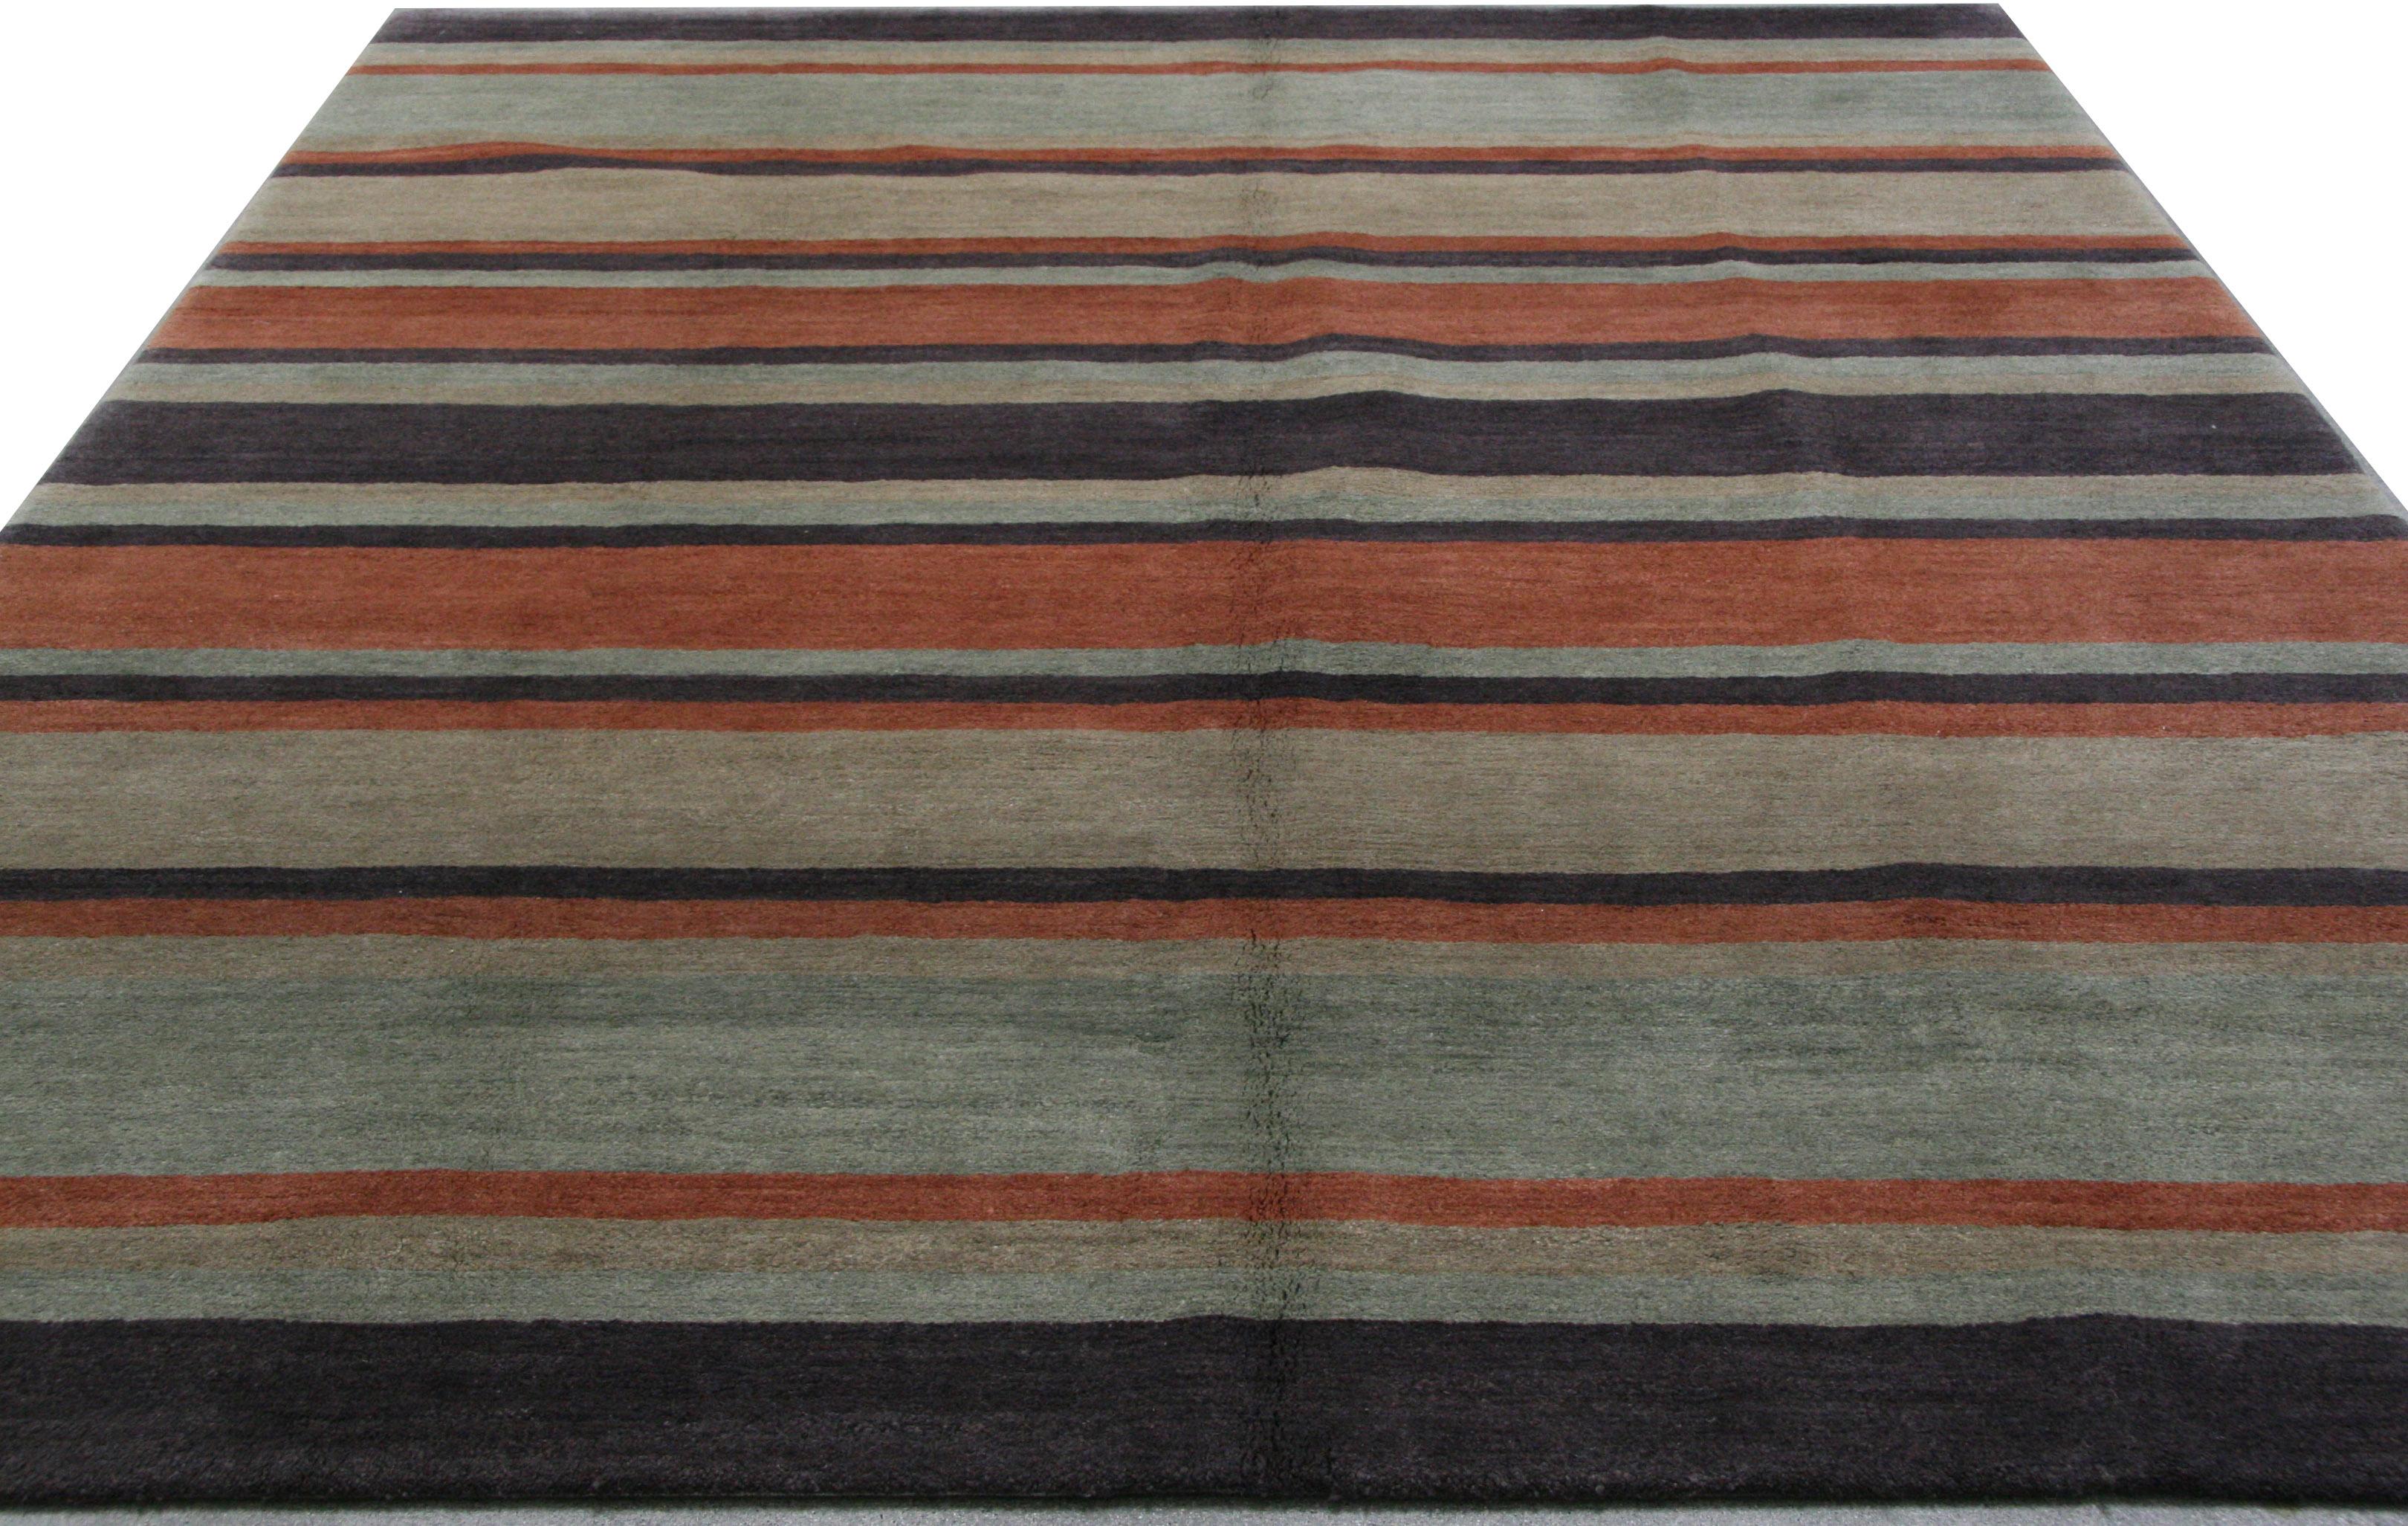 Tapis à rayures anthracite
Couleurs : Anthracite, rouille, or et beige.